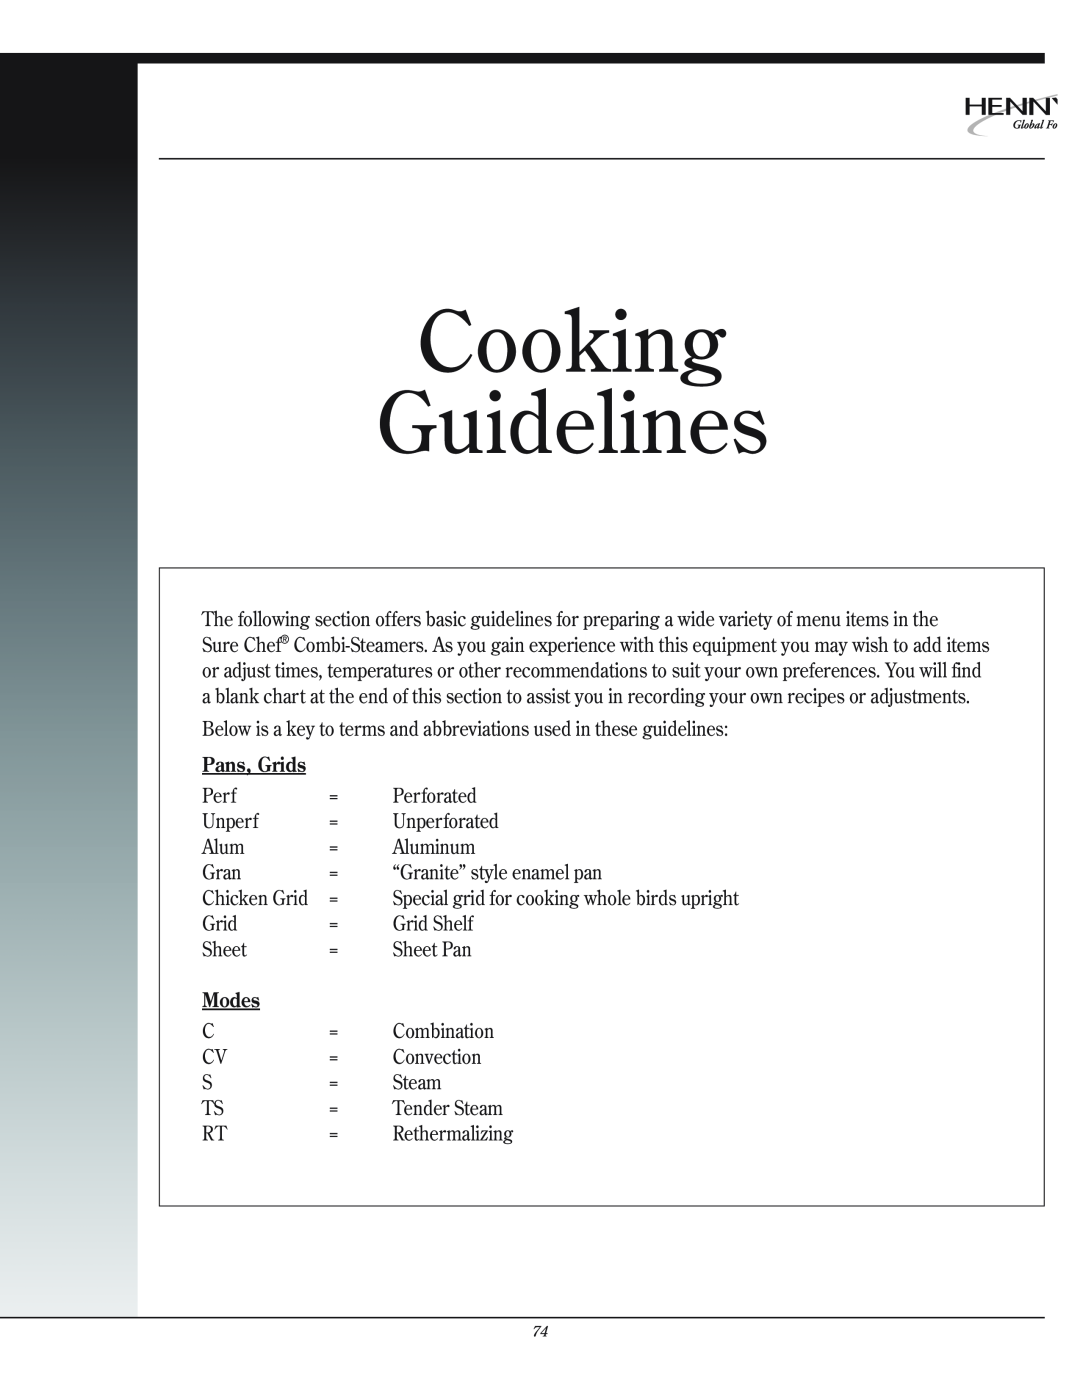 Henny Penny CSG manual Cooking Guidelines, Pans, Grids, Modes 